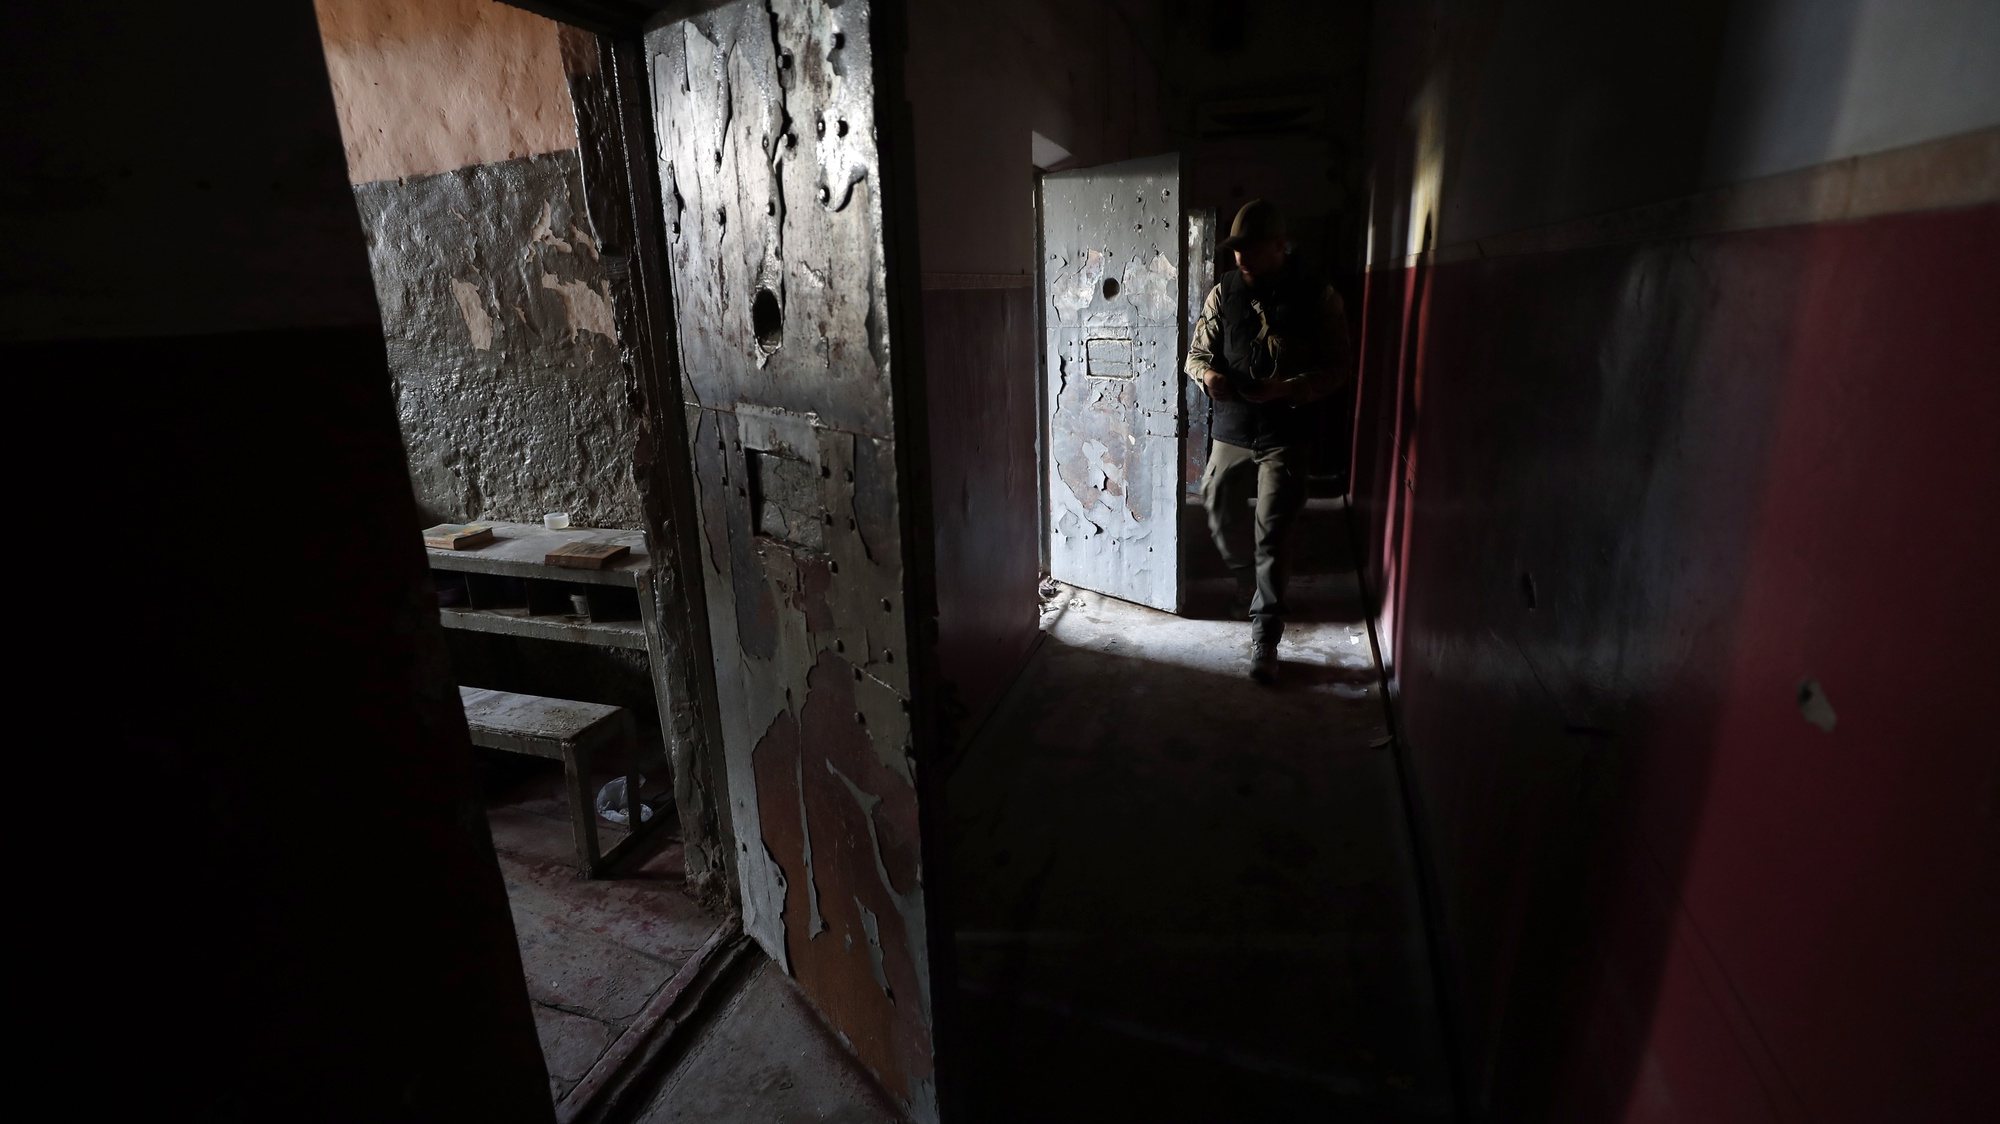 epa10233324 View into one room presented by a Ukrainian administrative officer in a building allegedly used by Russian troops as a dentention site, in Izyum, Ukraine, 09 October 2022. Russian troops entered Ukraine territory in February 2022, starting a conflict that has provoked destruction and a humanitarian crisis. Parts of Kharkiv region were de-occupied by Russian forces in September.  EPA/ATEF SAFADI